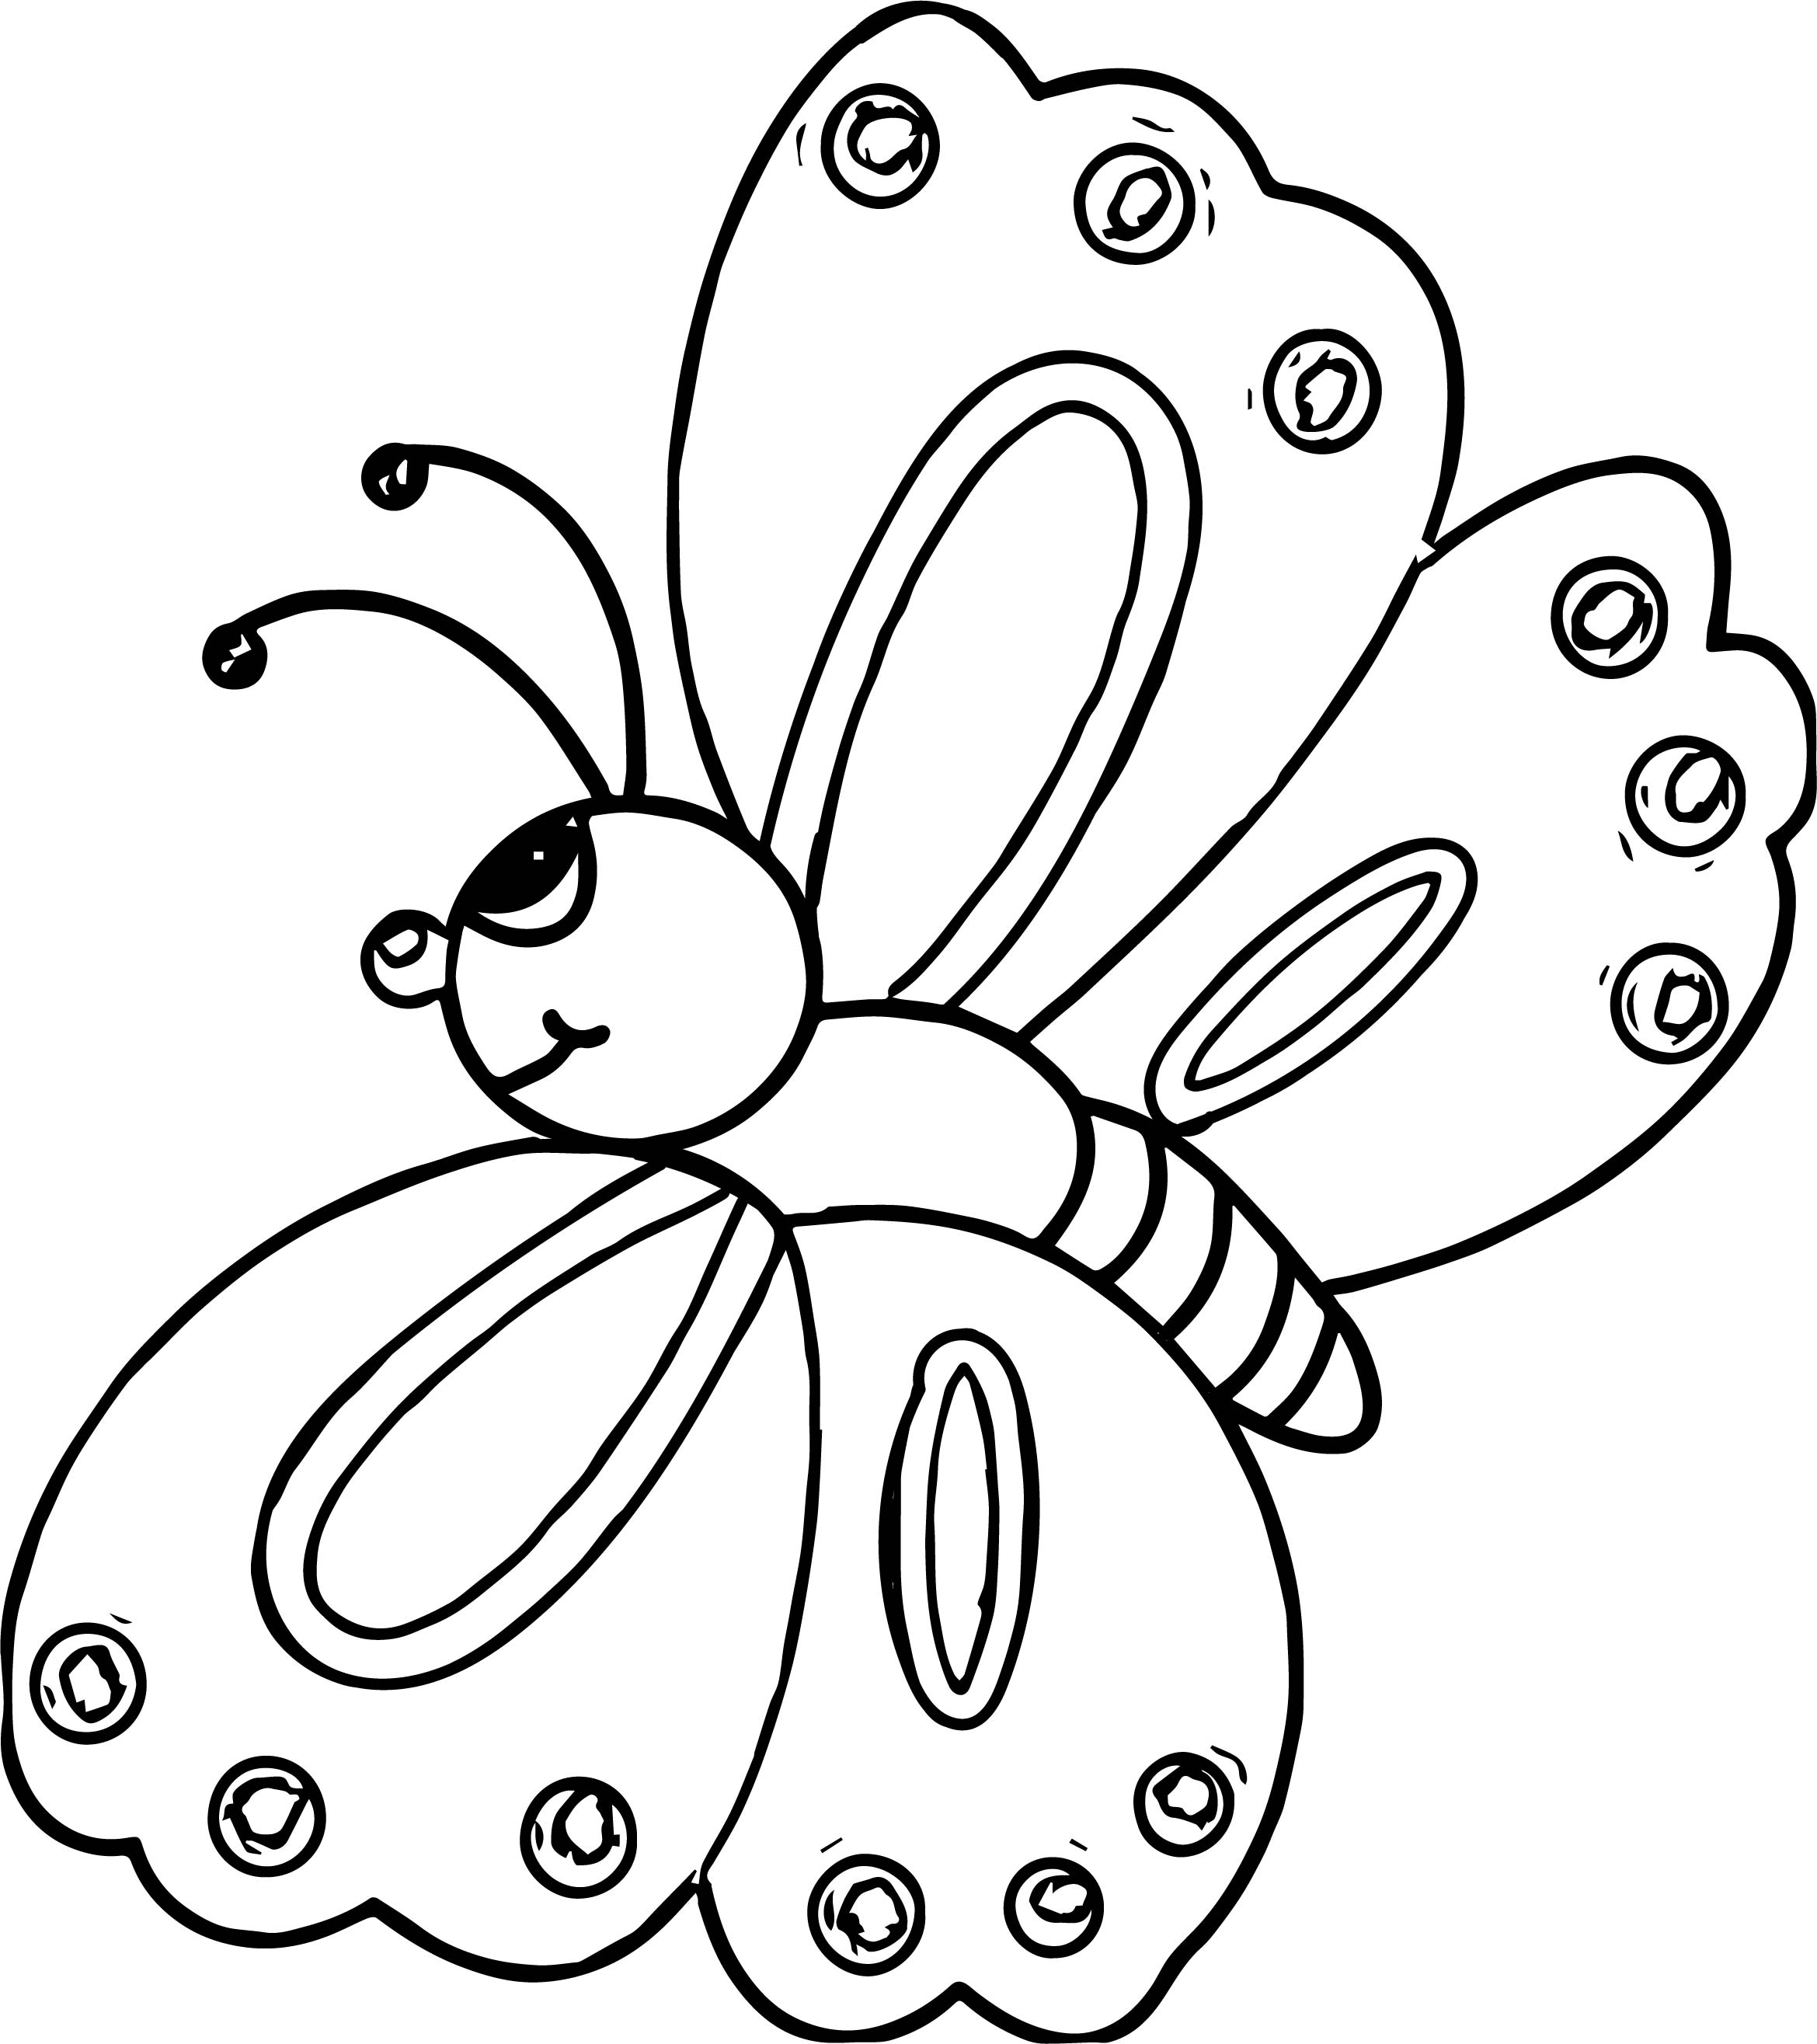 Blue Morpho Butterfly Coloring Page Coloring Pages